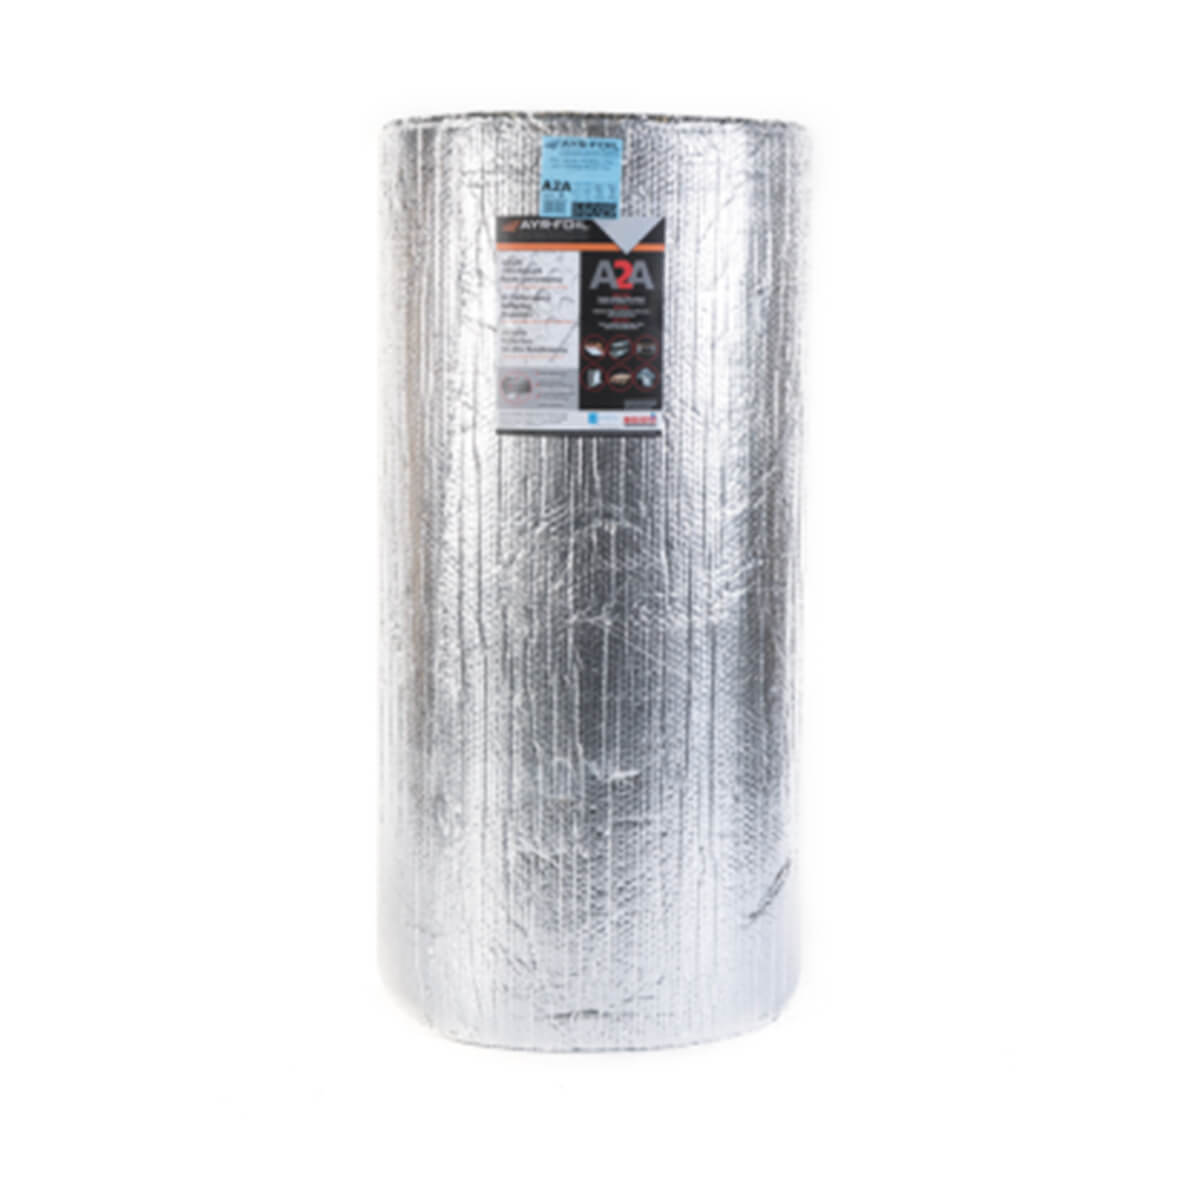 AYR-FOIL Reflective Insulation - 16-in x 25-ft - M2M